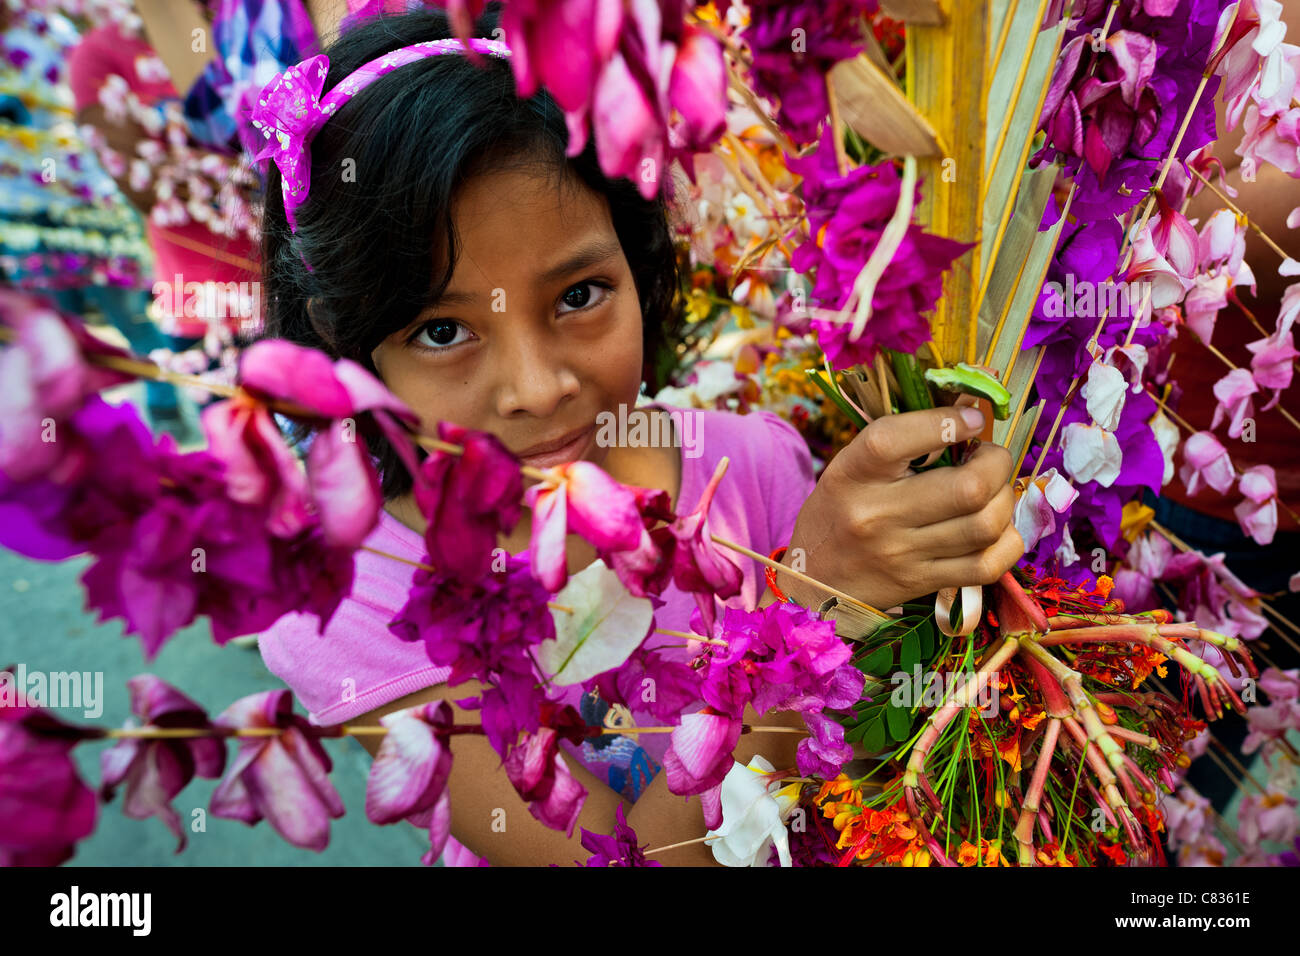 A Salvadoran girl carries a palm branch with colorful flower blooms during the Flower & Palm Festival in El Salvador. Stock Photo